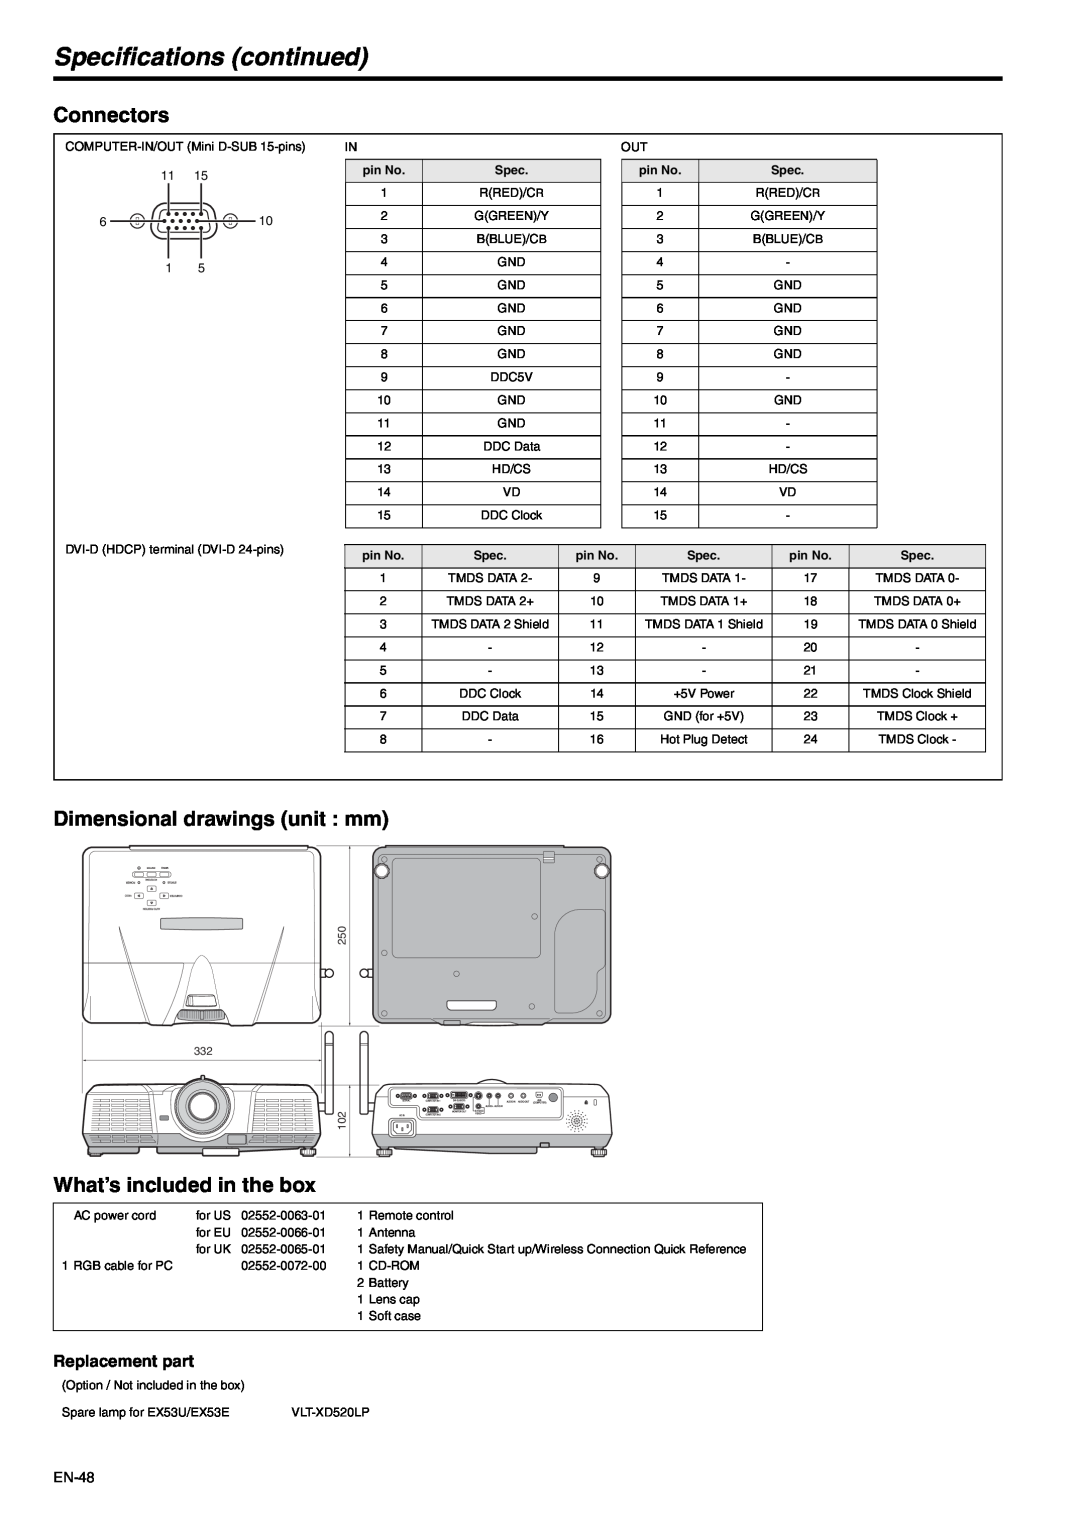 Mitsubishi Electronics EX53U Specifications continued, Connectors, Dimensional drawings unit mm, Replacement part, pin No 